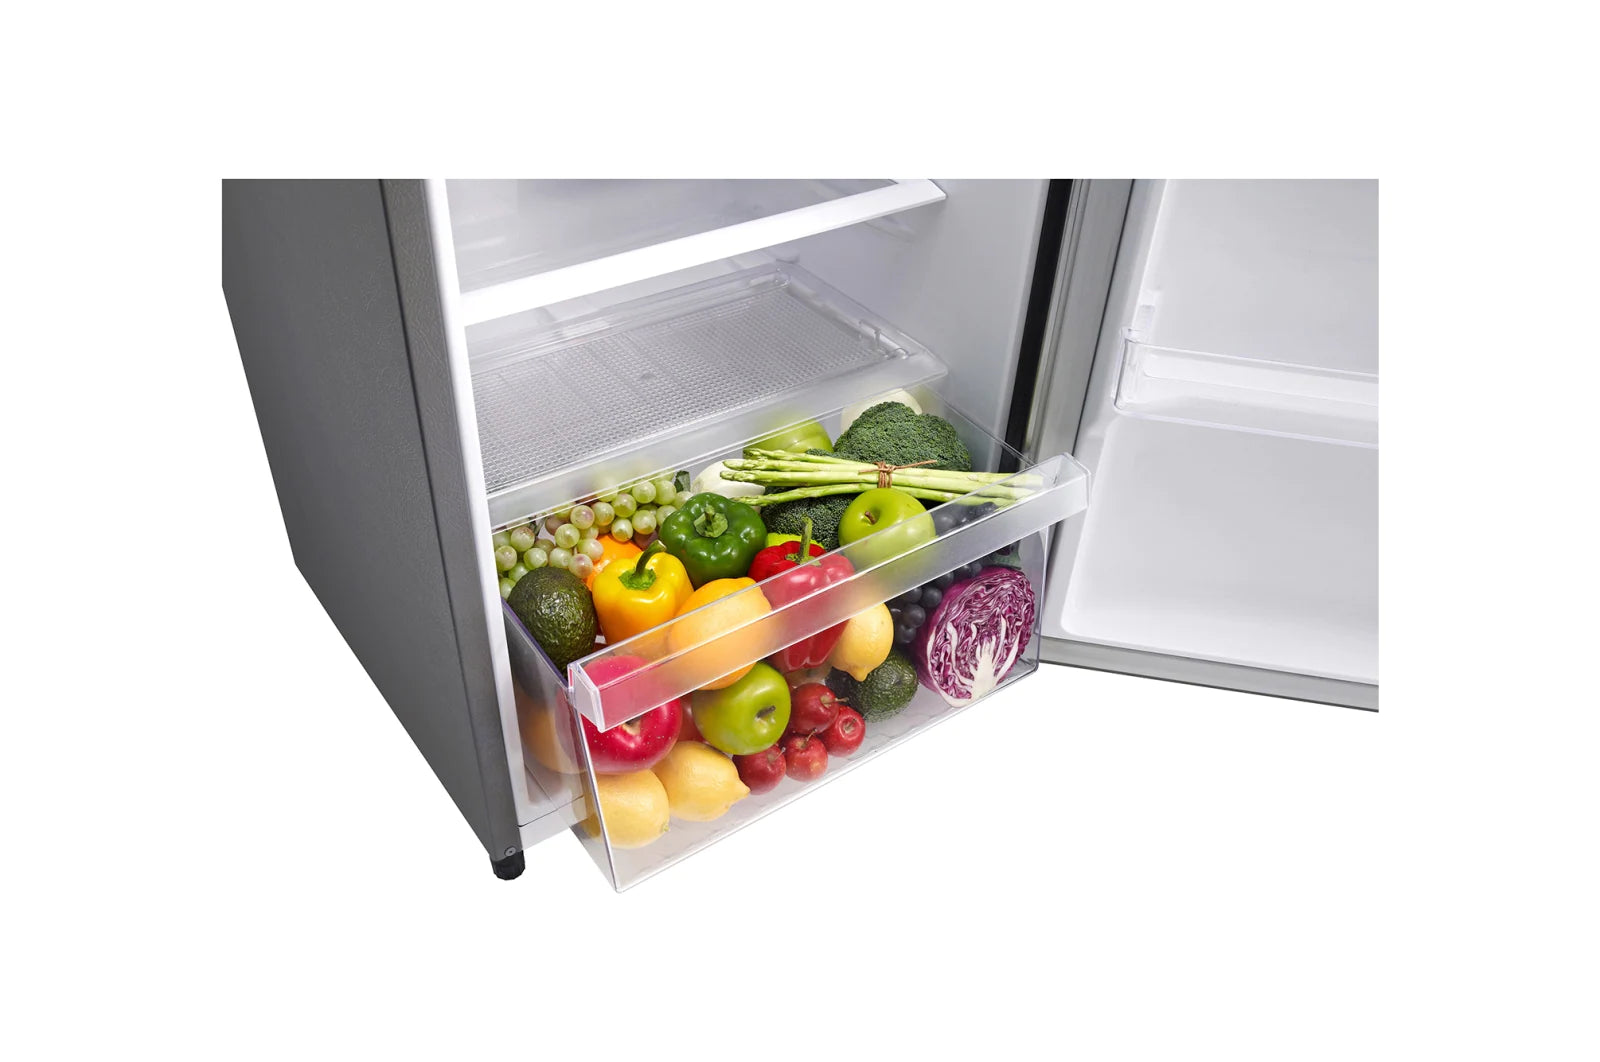 LG Refrigerator 7 Cu. ft. with Water Dispenser